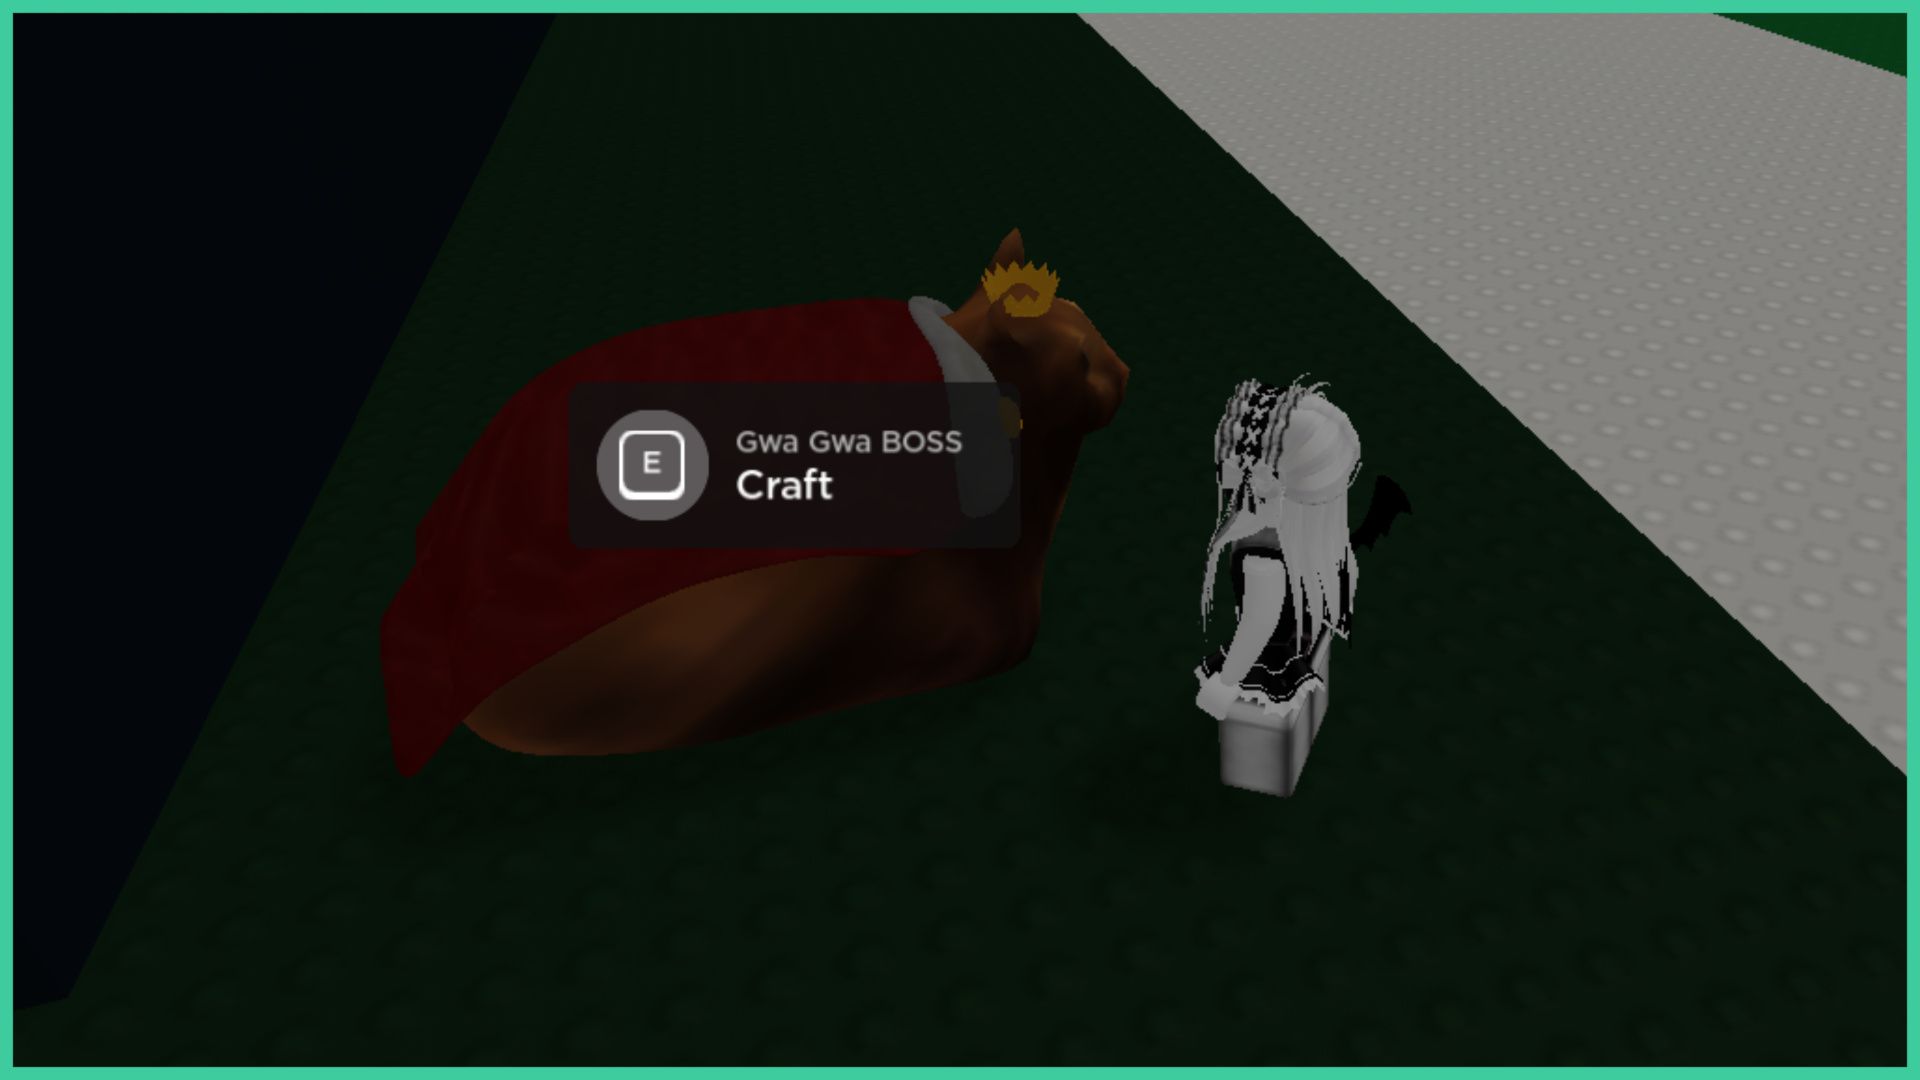 feature image for our hade's rng crafting guide, it's a screenshot of a roblox player standing in front of a giant orange cat wearing a cape and crown called gwa gwa with a prompt that reads 'gwa gwa boss, press E to craft'